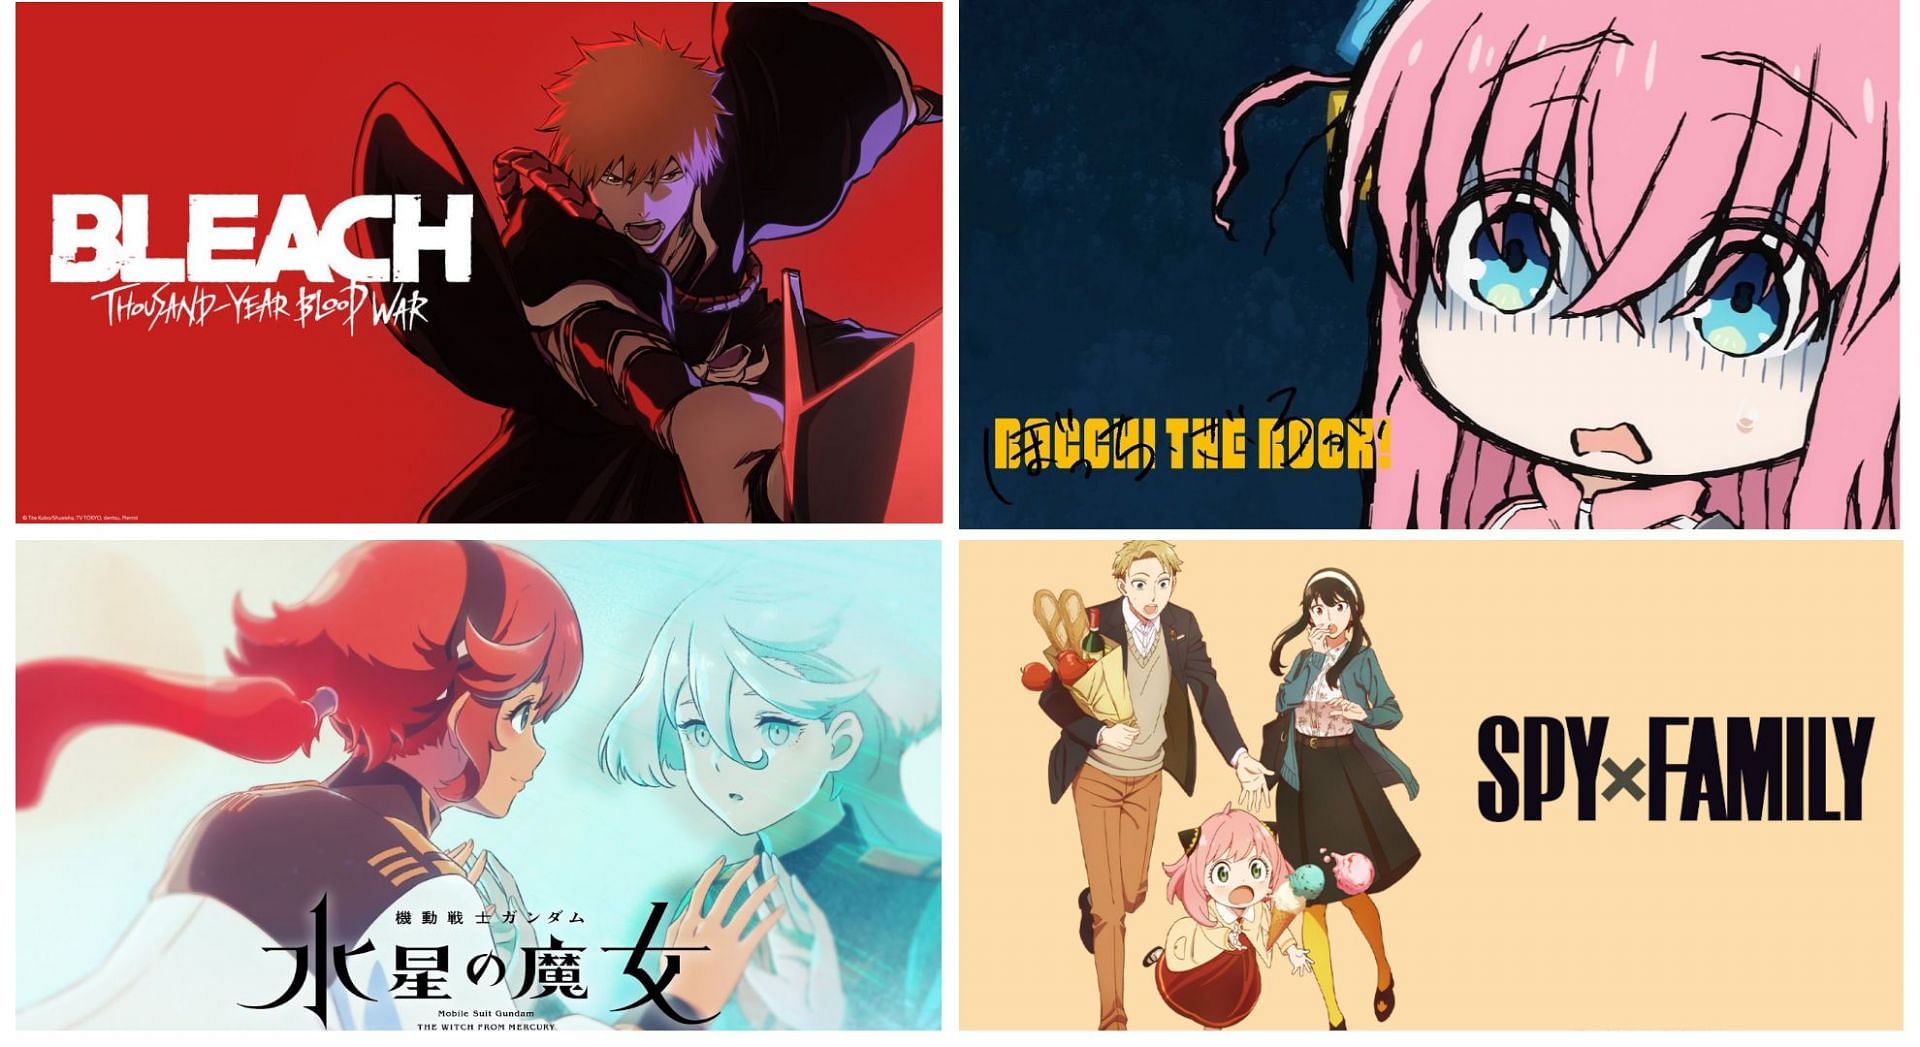 Best 12 Episode Anime Series You Should Watch